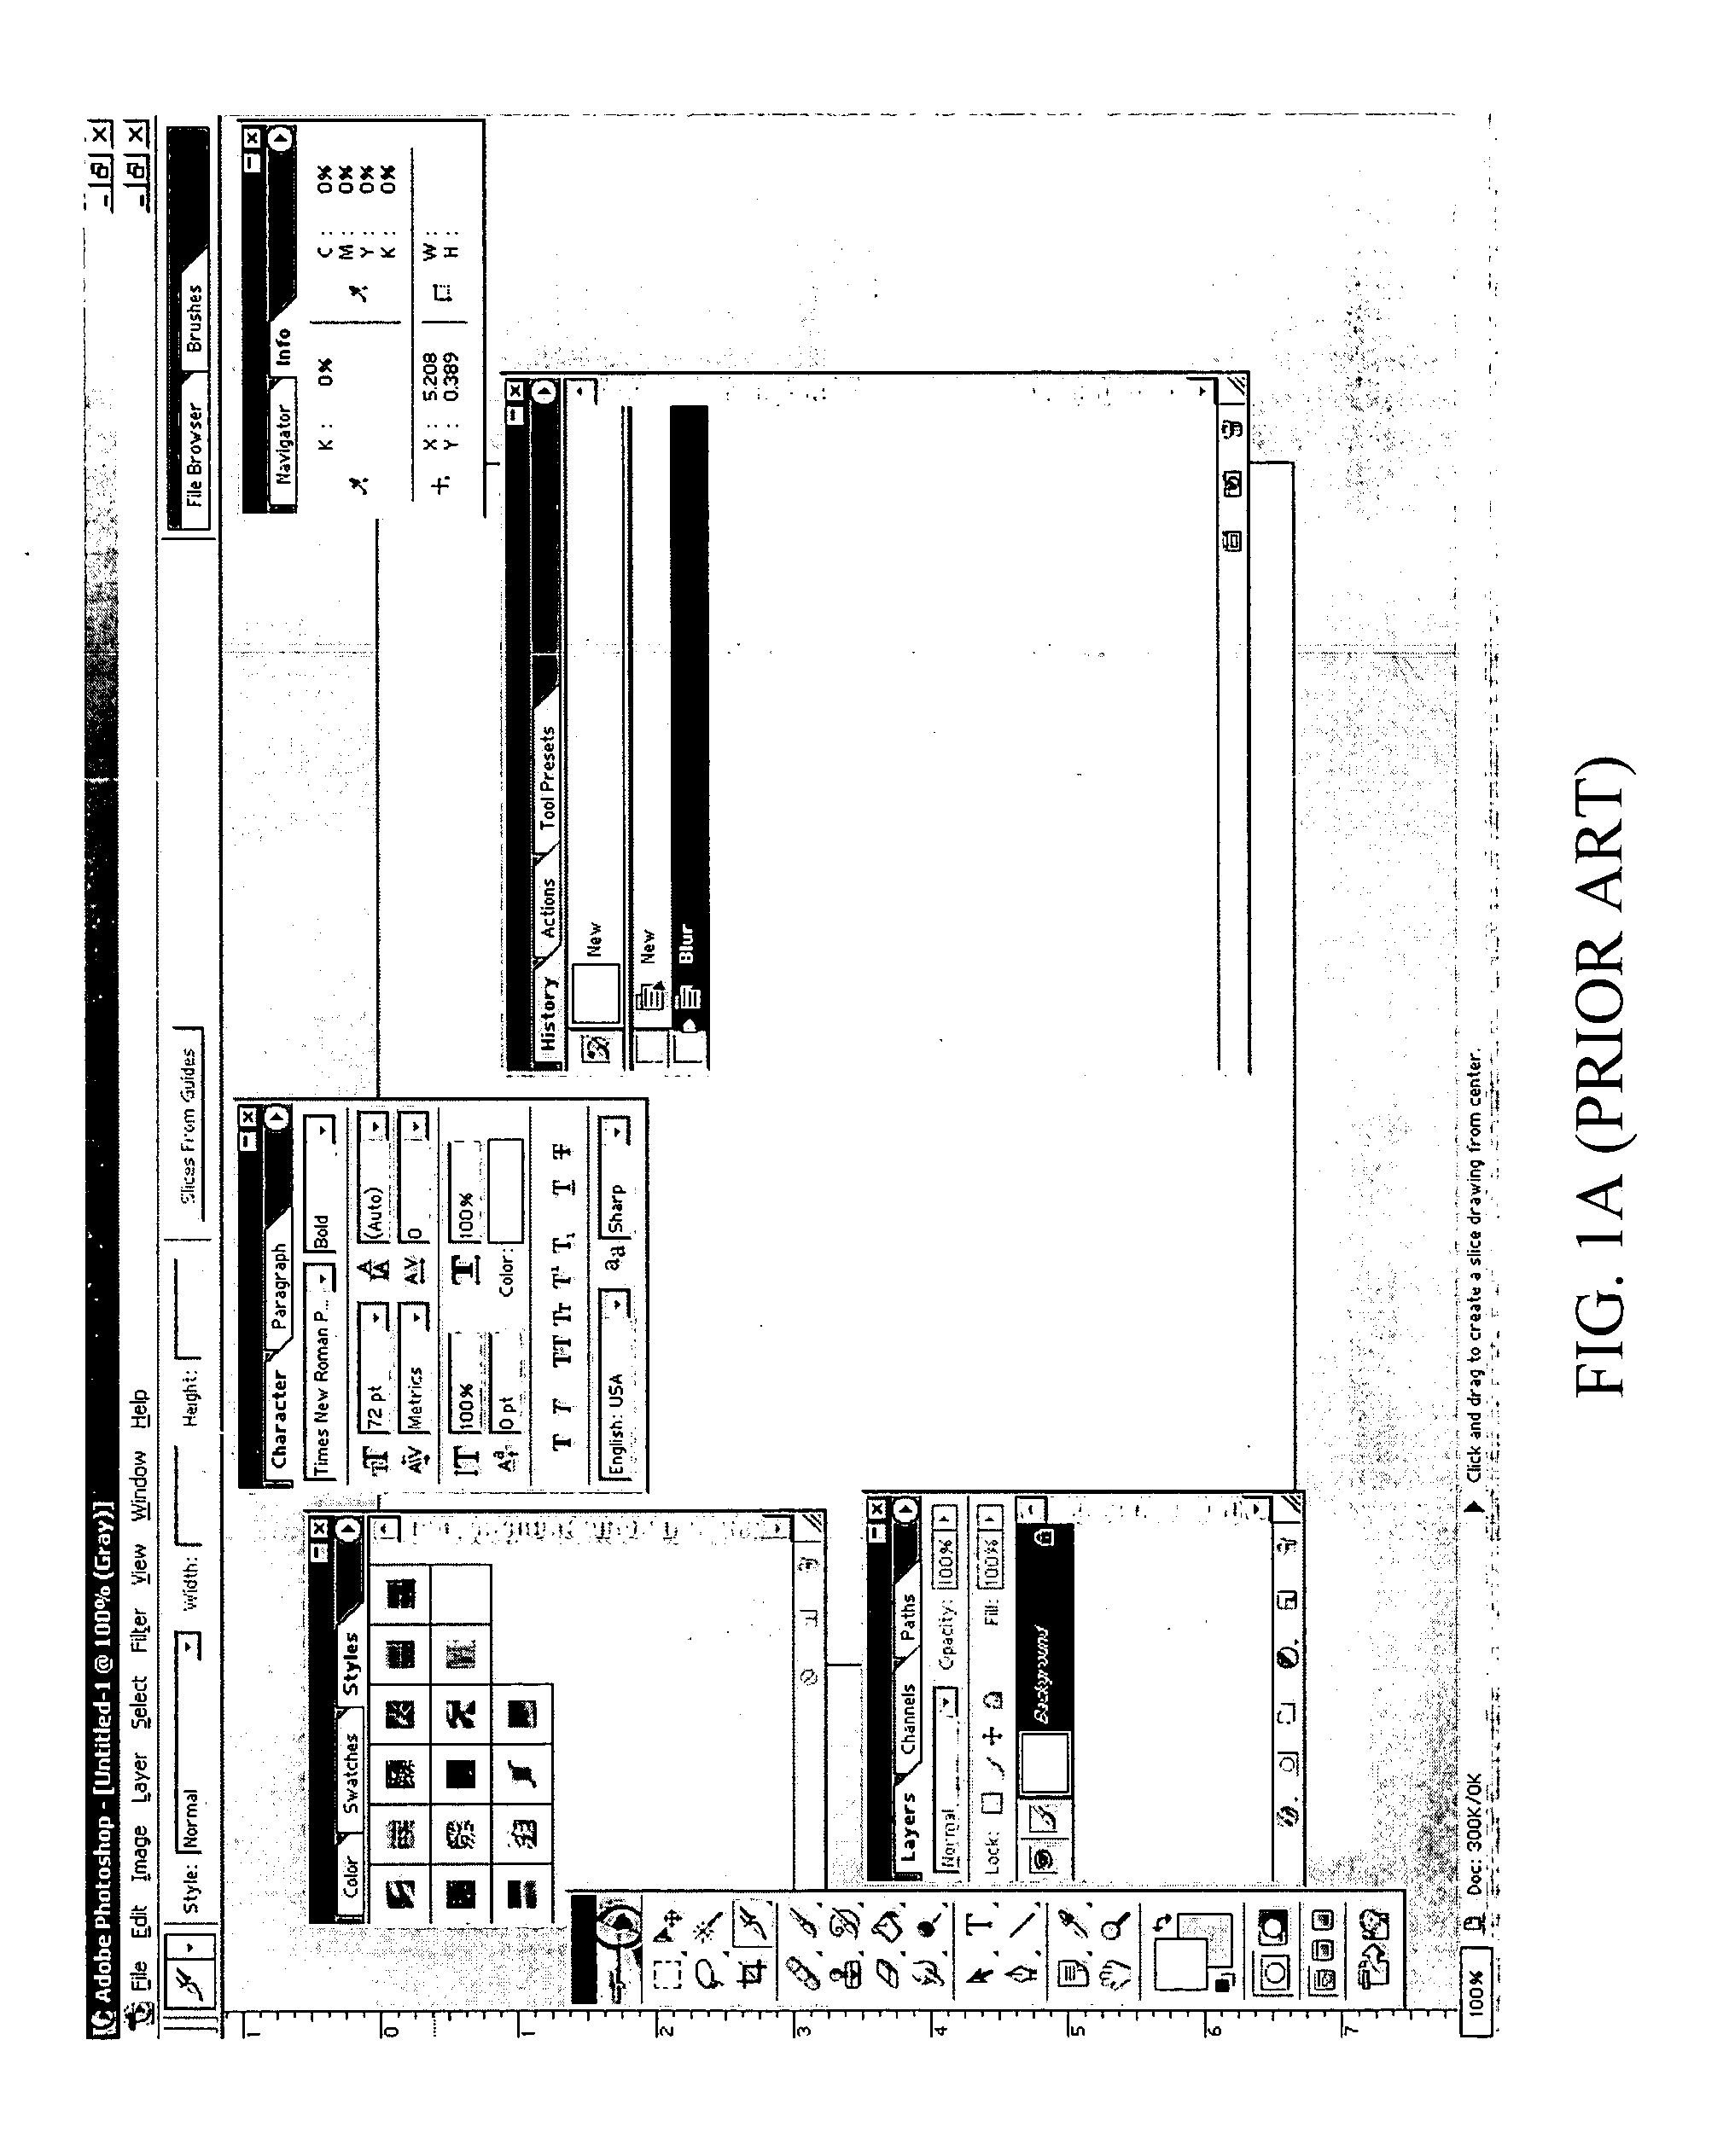 Management of multiple window panels with a graphical user interface